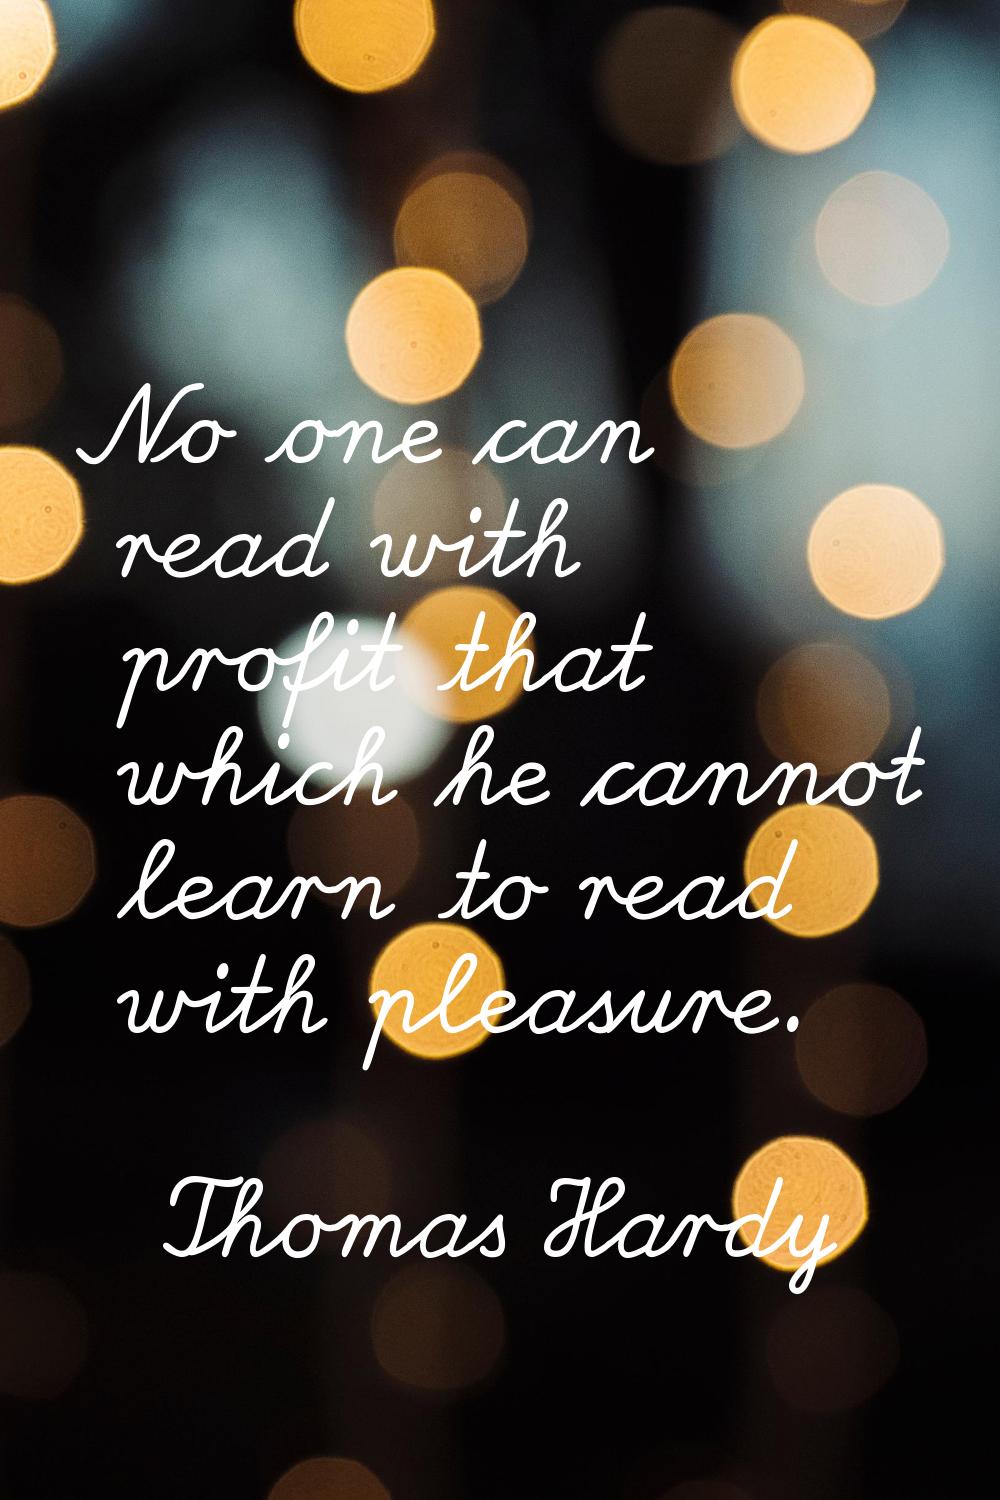 No one can read with profit that which he cannot learn to read with pleasure.